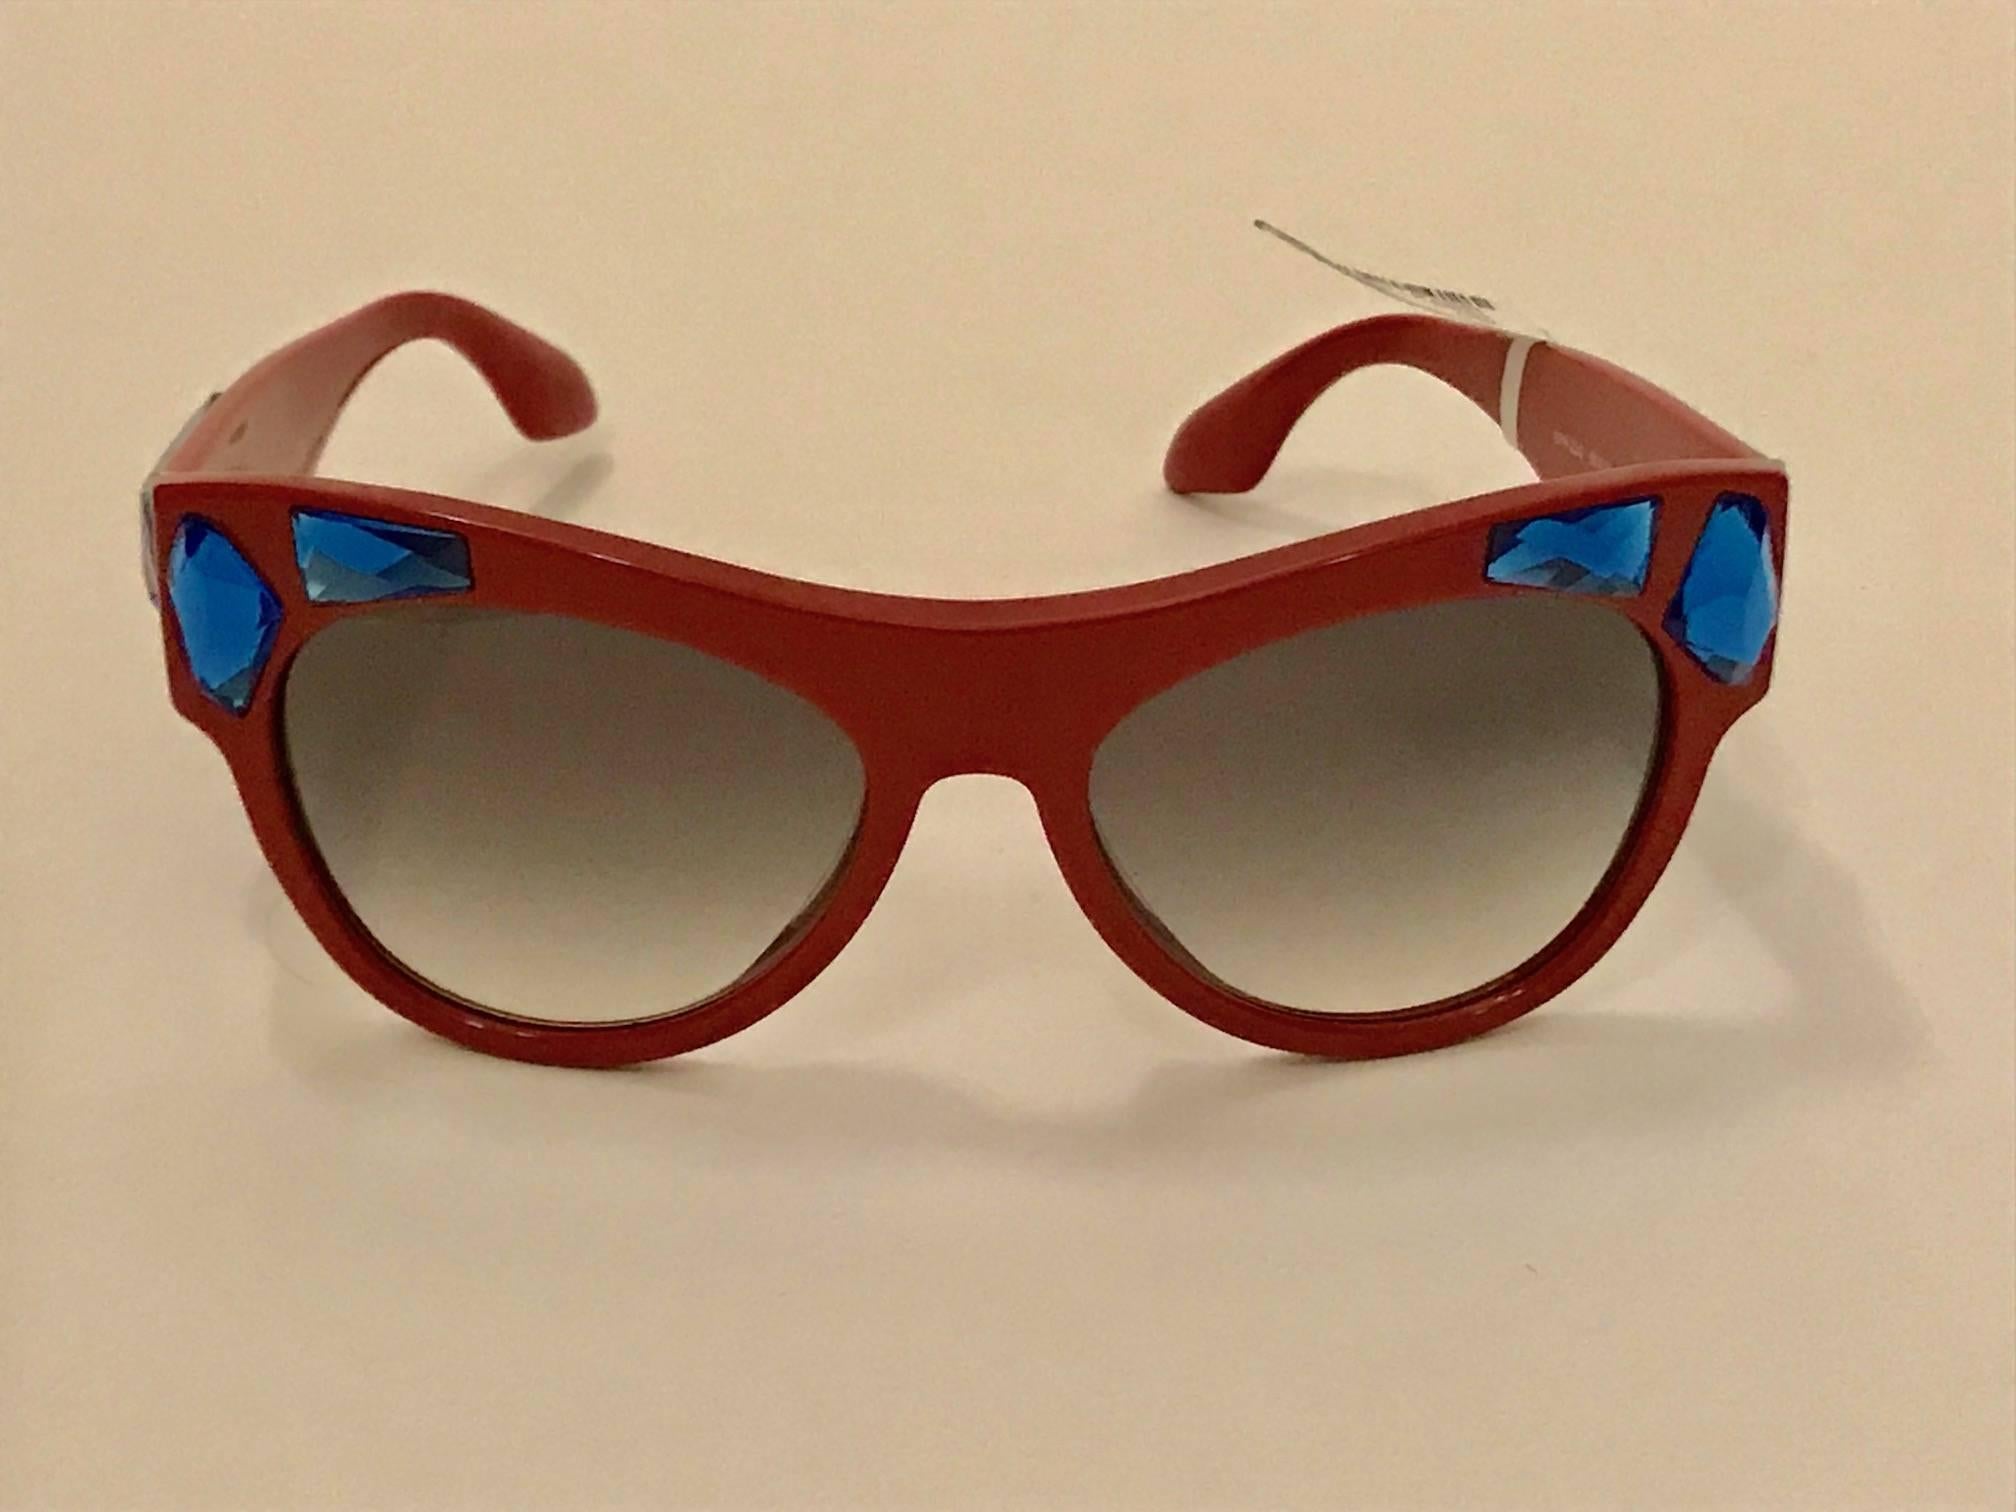 Prada 'Voice' red acetate sunglasses with blue crystal embellishment and gold Prada logo at temple. Grey gradient lenses with 100% UVA & UVB protection.

Size: 140 mm x 56 mm.

Made in Italy.

Excellent condition. New with tags, no flaws to